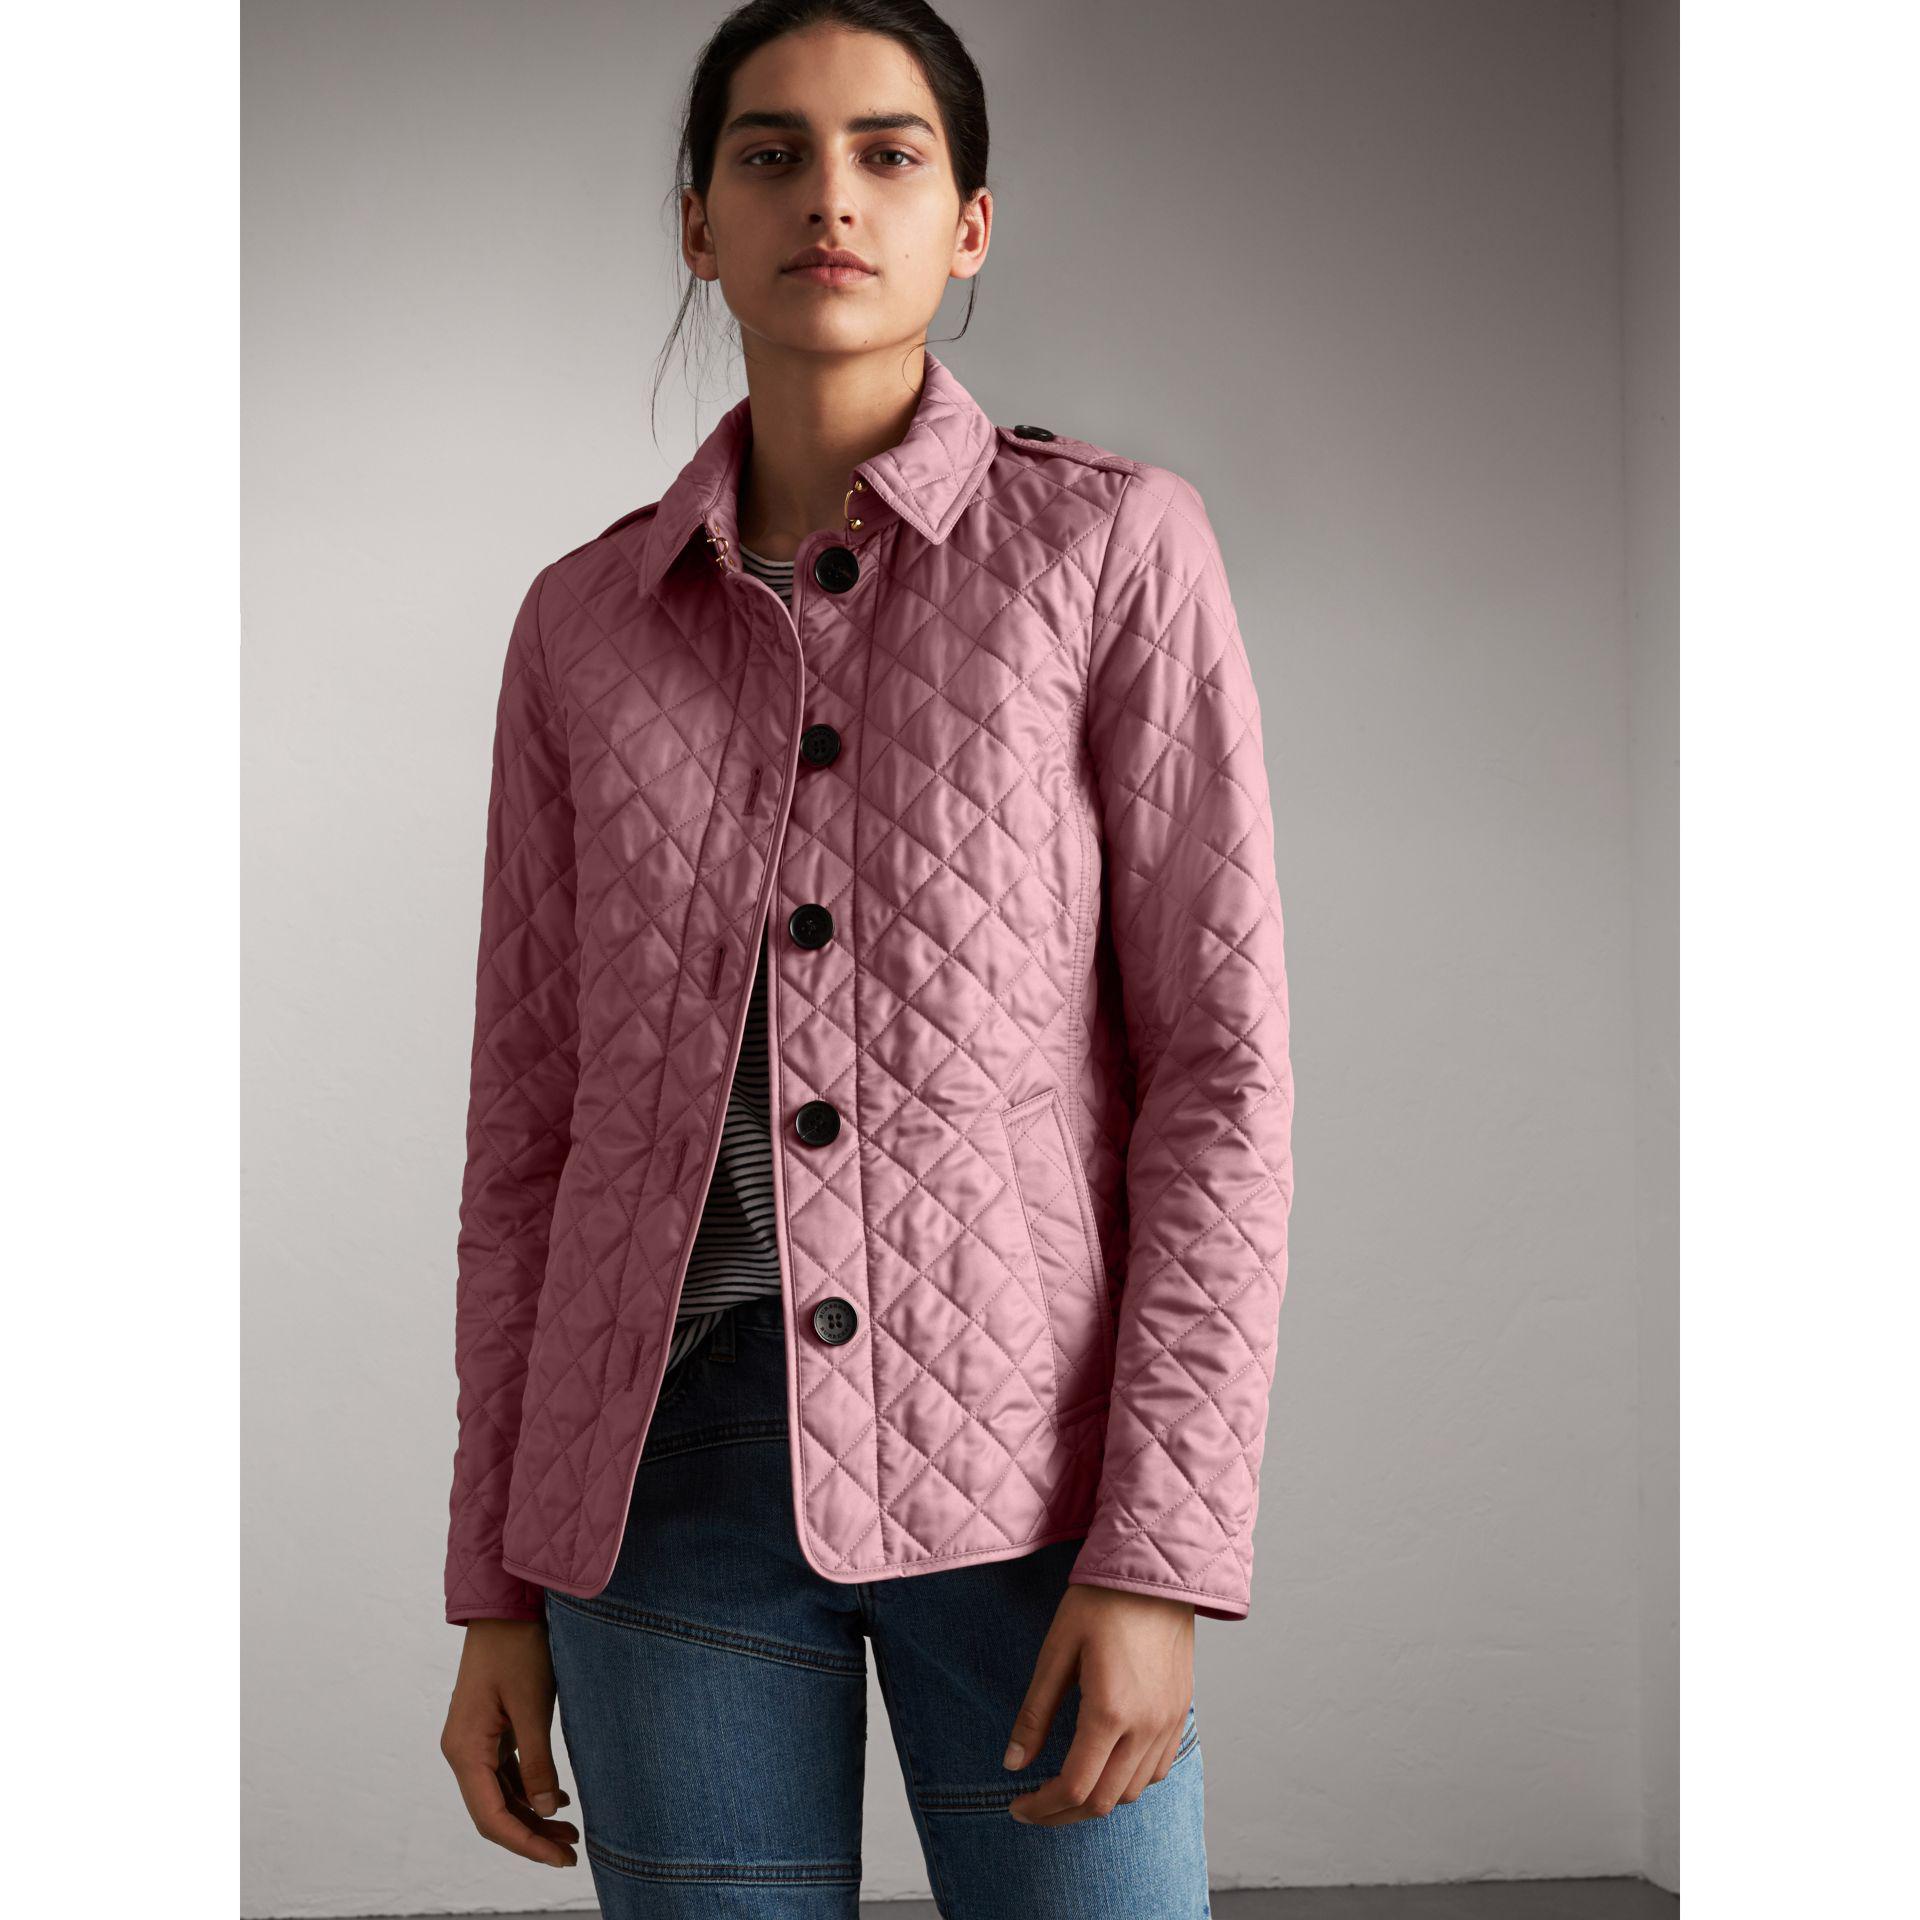 Burberry Diamond Quilted Jacket Vintage Rose in Pink | Lyst